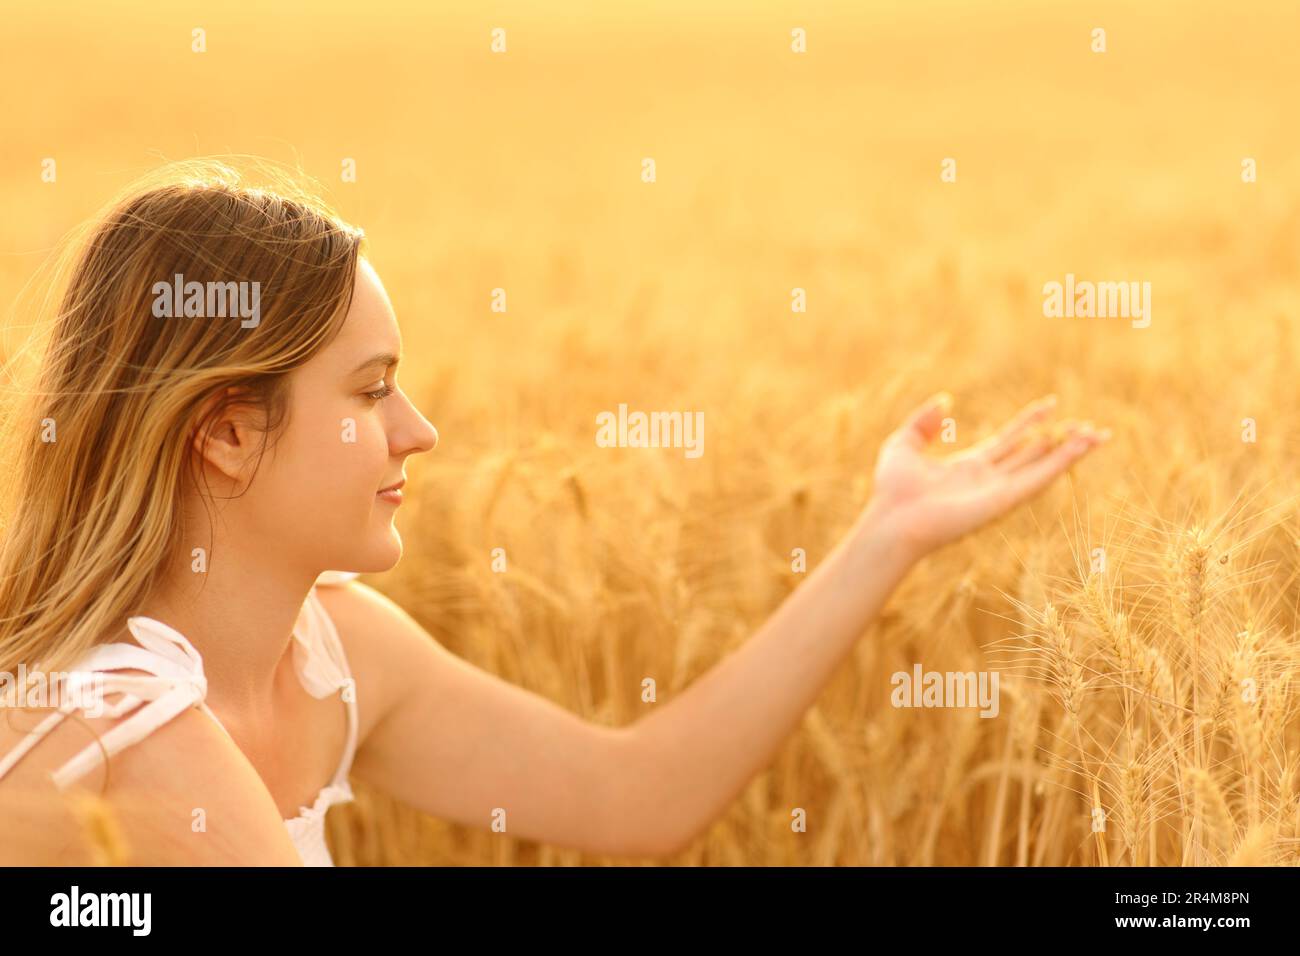 Relaxed woman touching golden wheat in a field Stock Photo